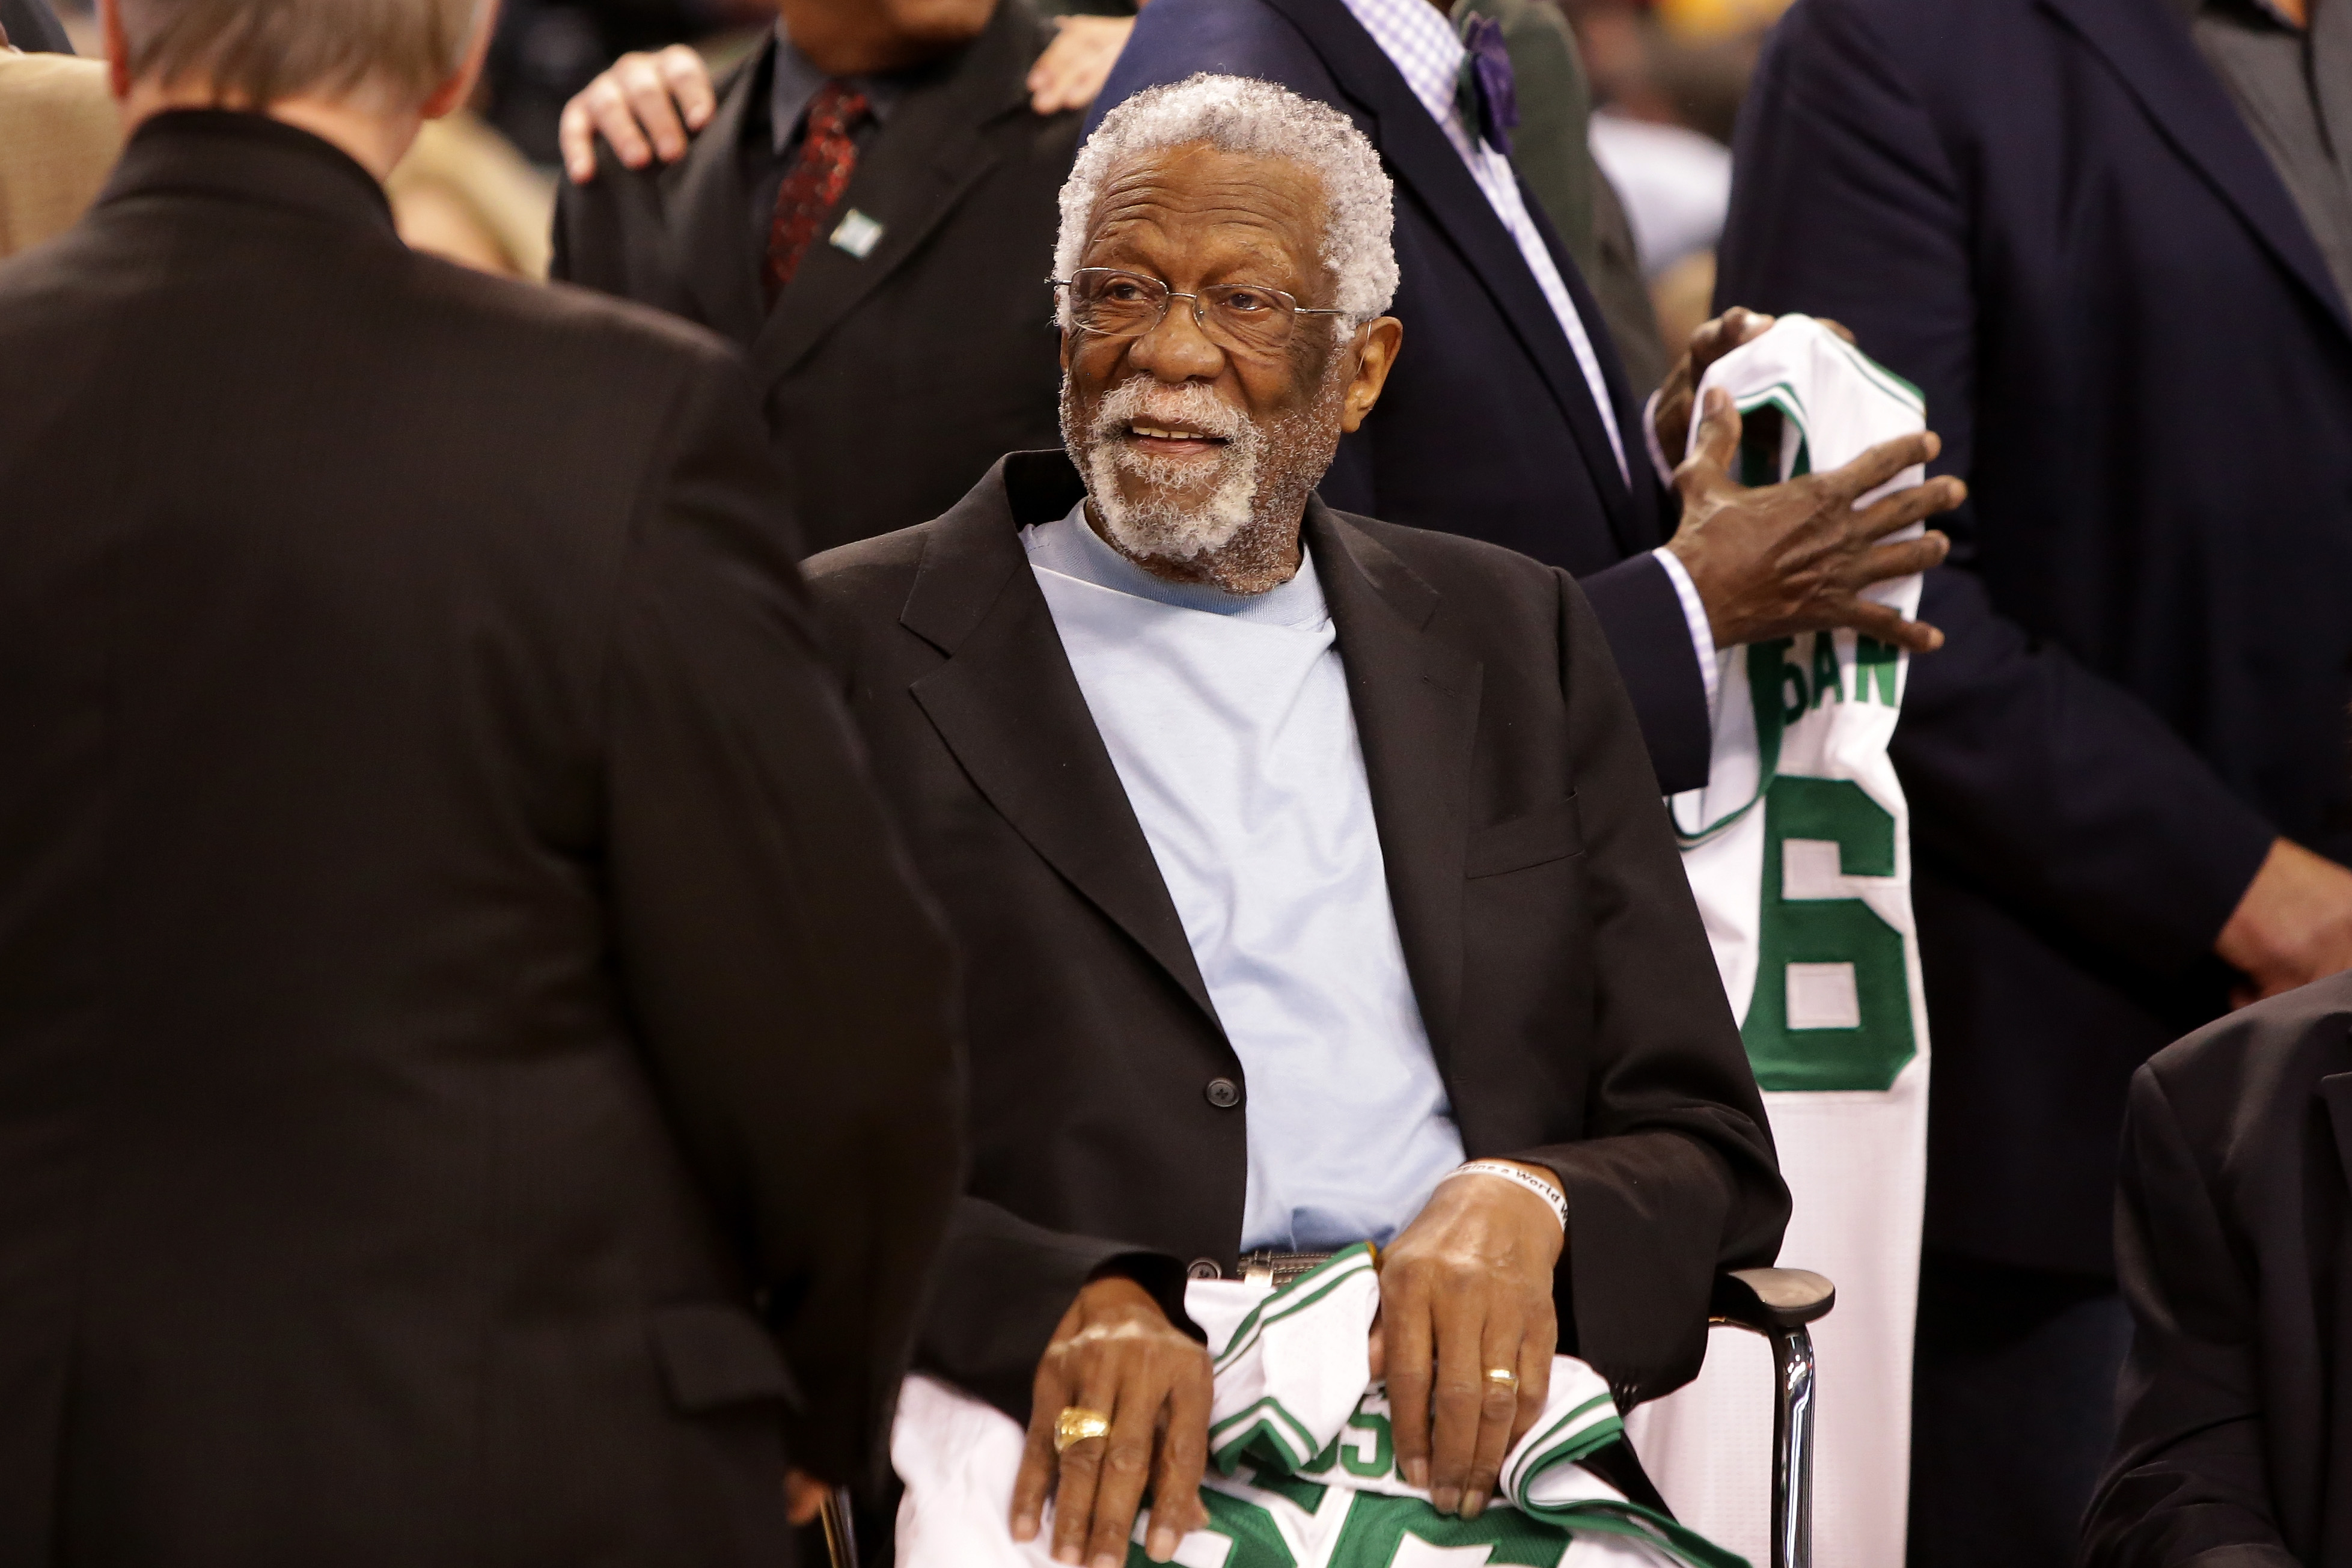 Bill Russell is honored at halftime of the game between the Boston Celtics and the Miami Heat at TD Garden on April 13, 2016 in Boston, Massachusetts.